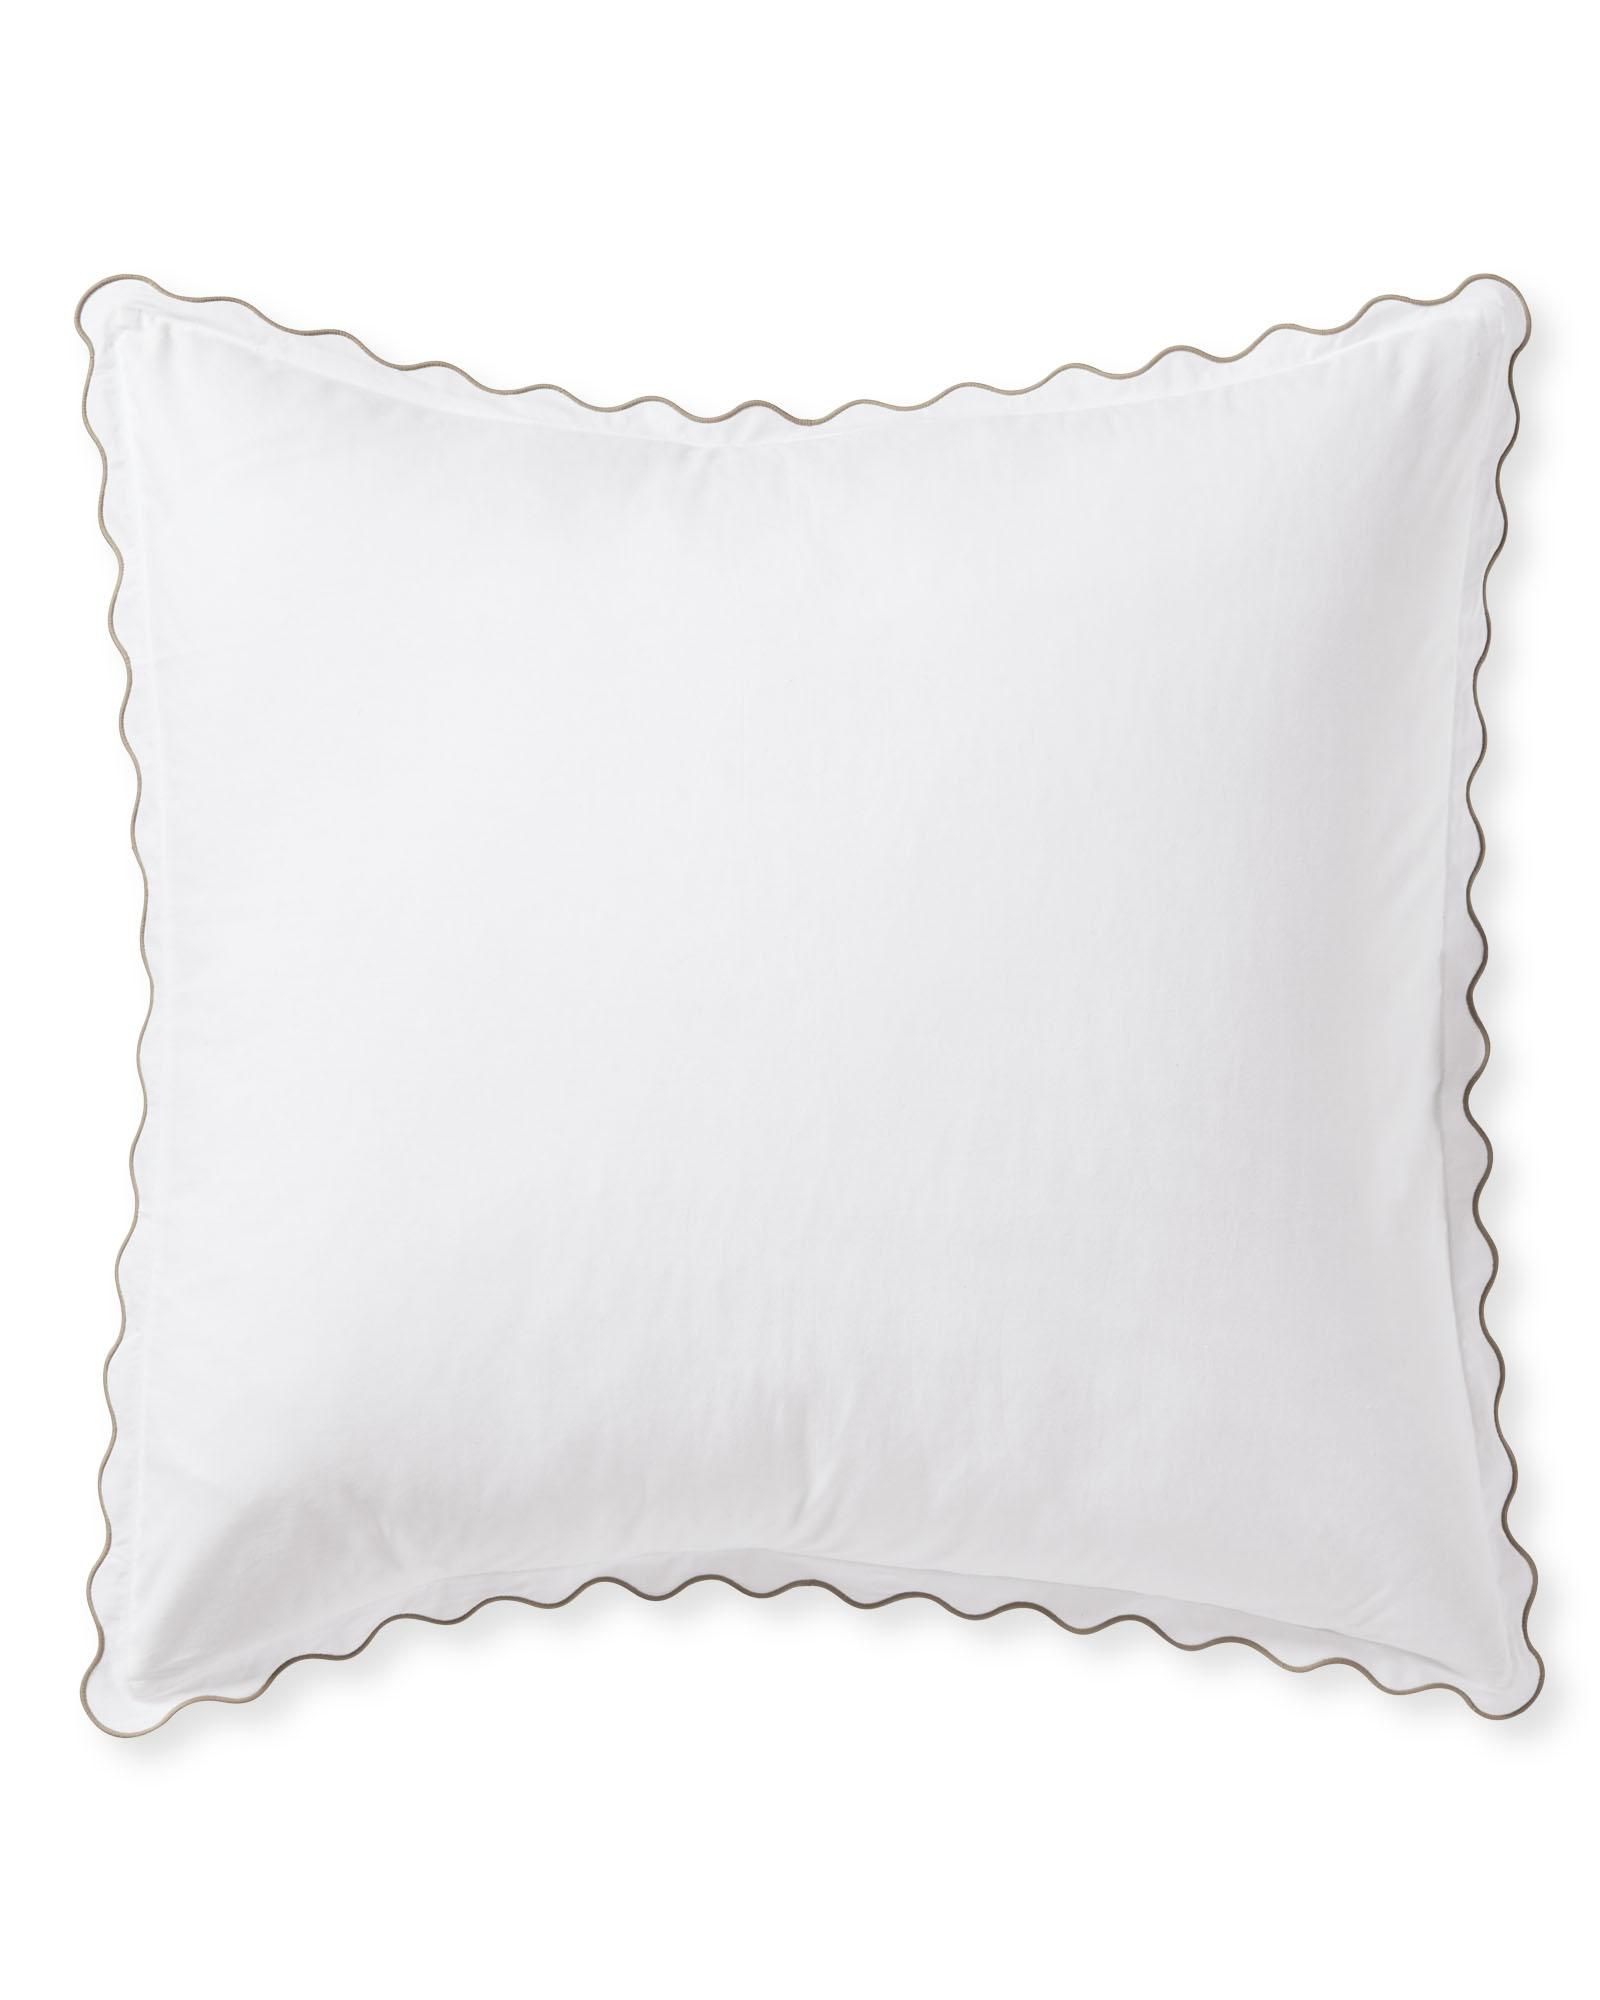 Wave Percale Sham - Doe | Serena and Lily